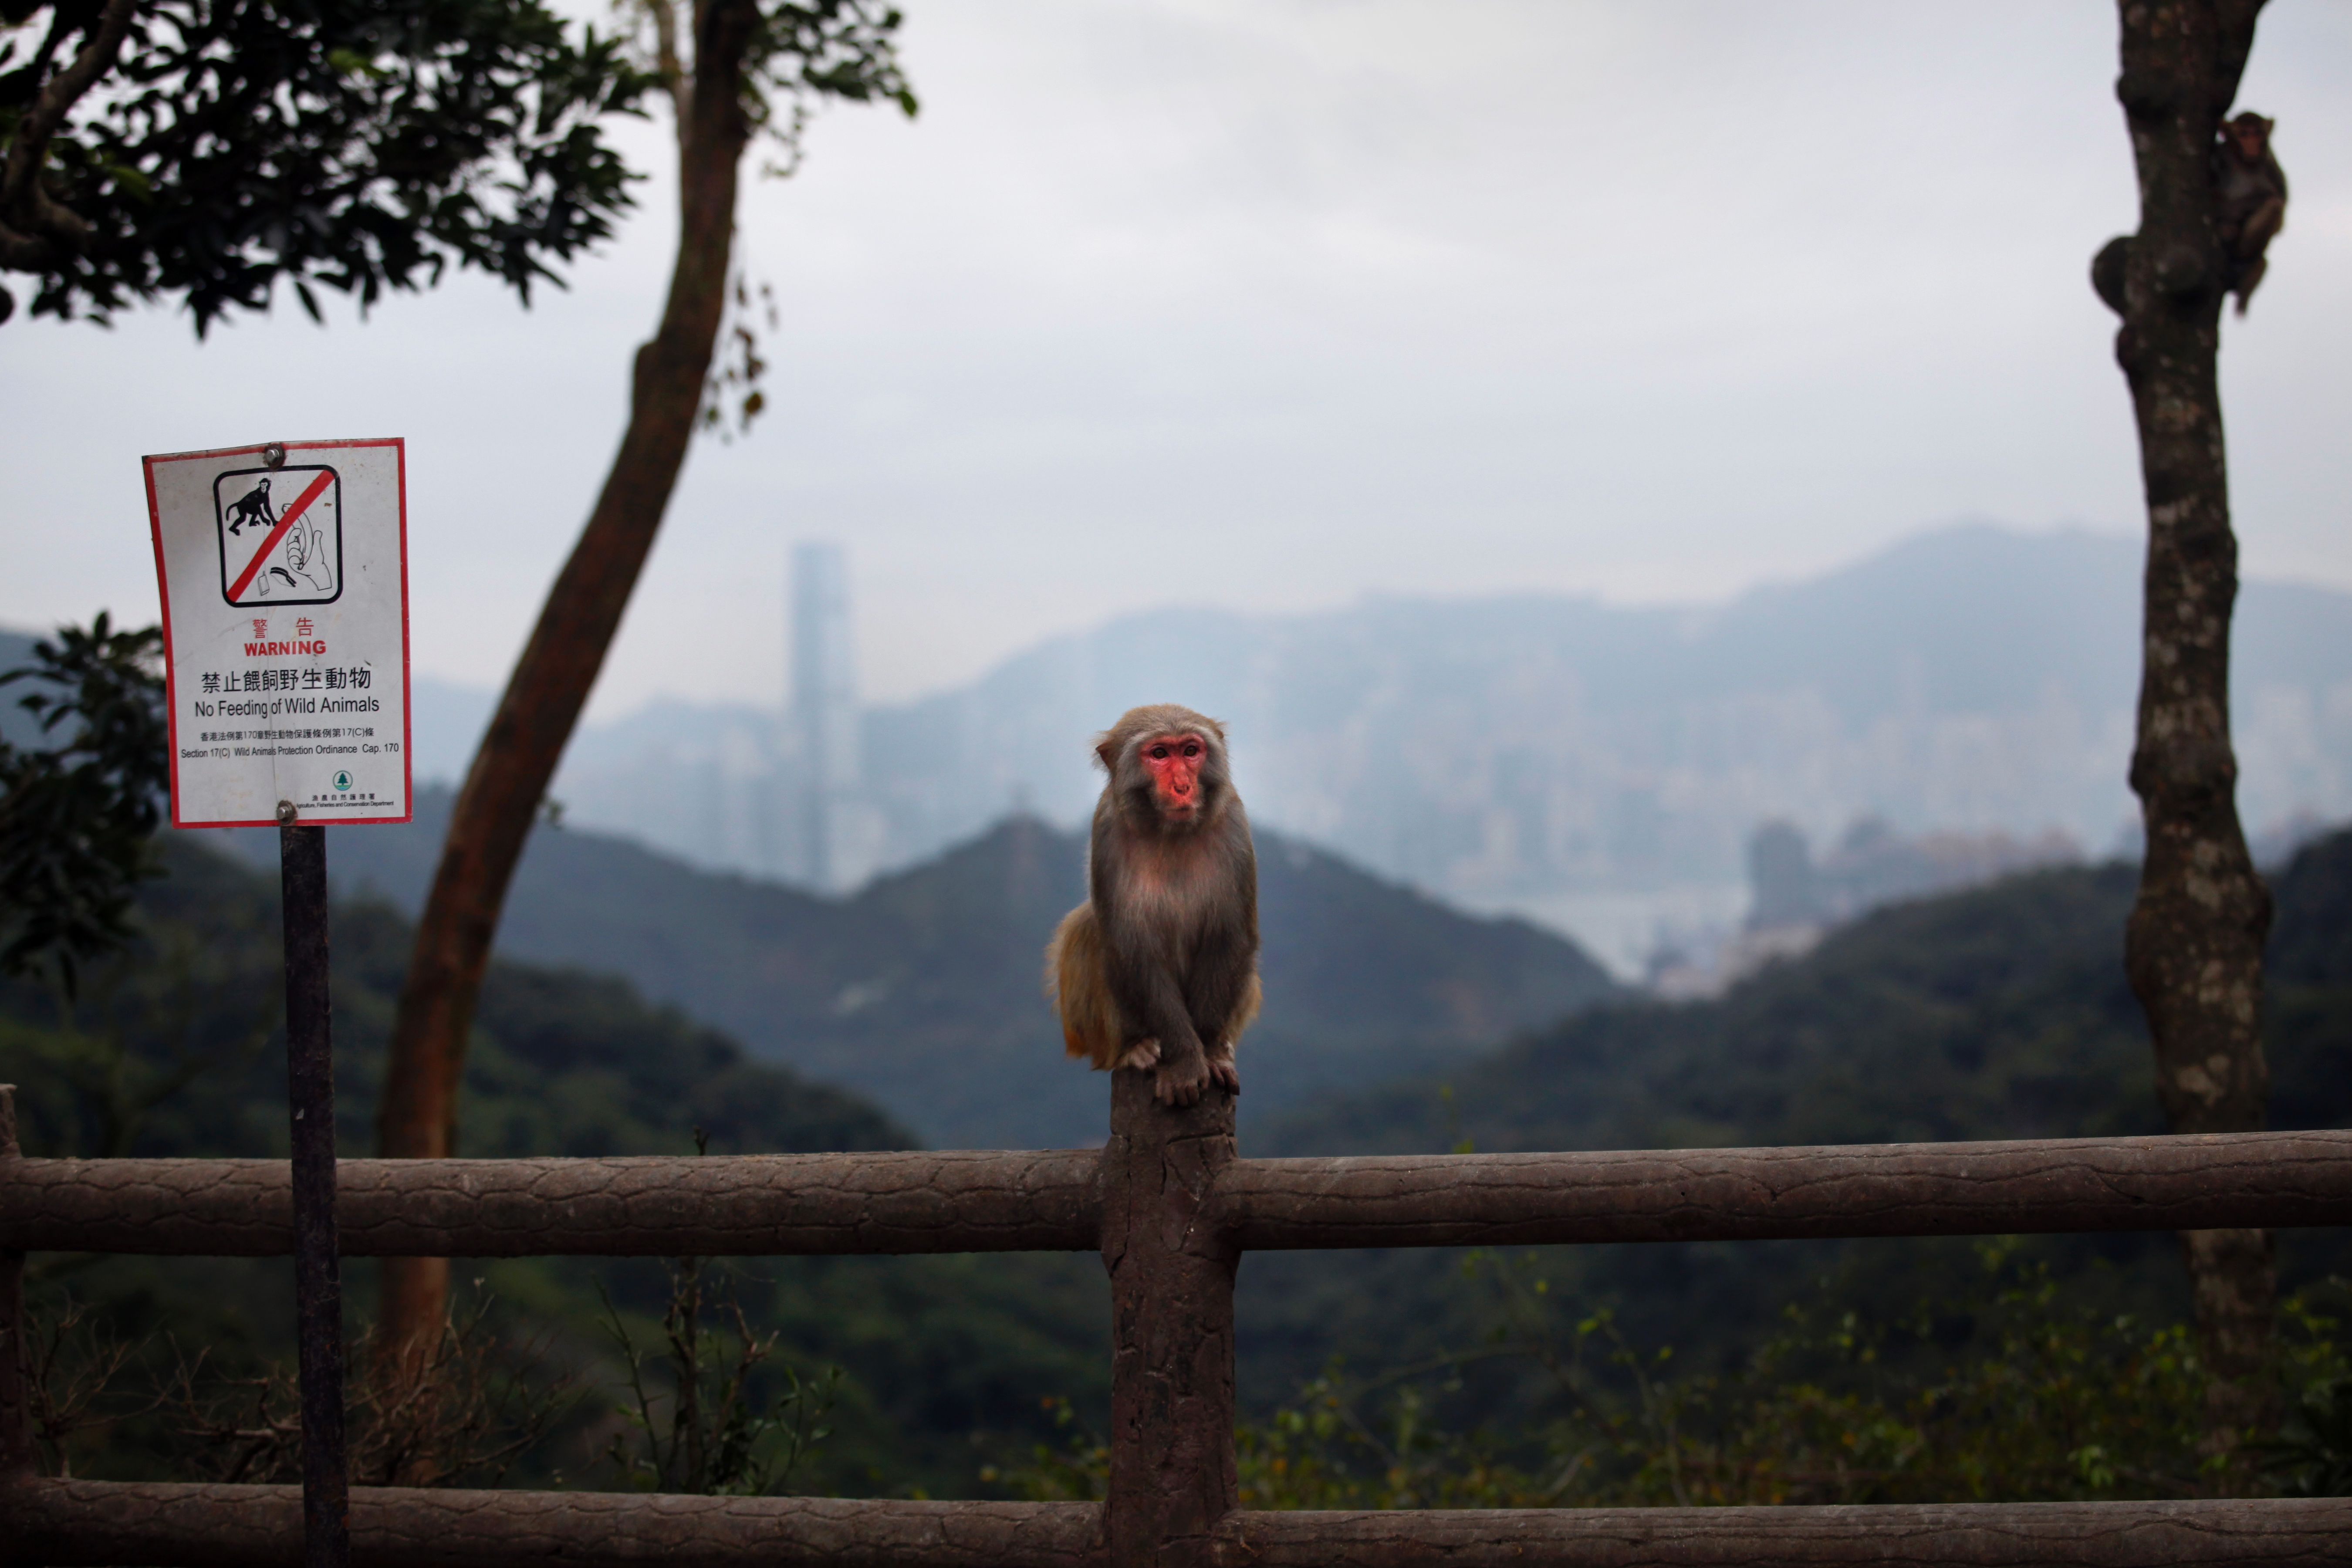 Monkey Attack Leads to First Human Case of B Virus in Hong Kong - Bloomberg